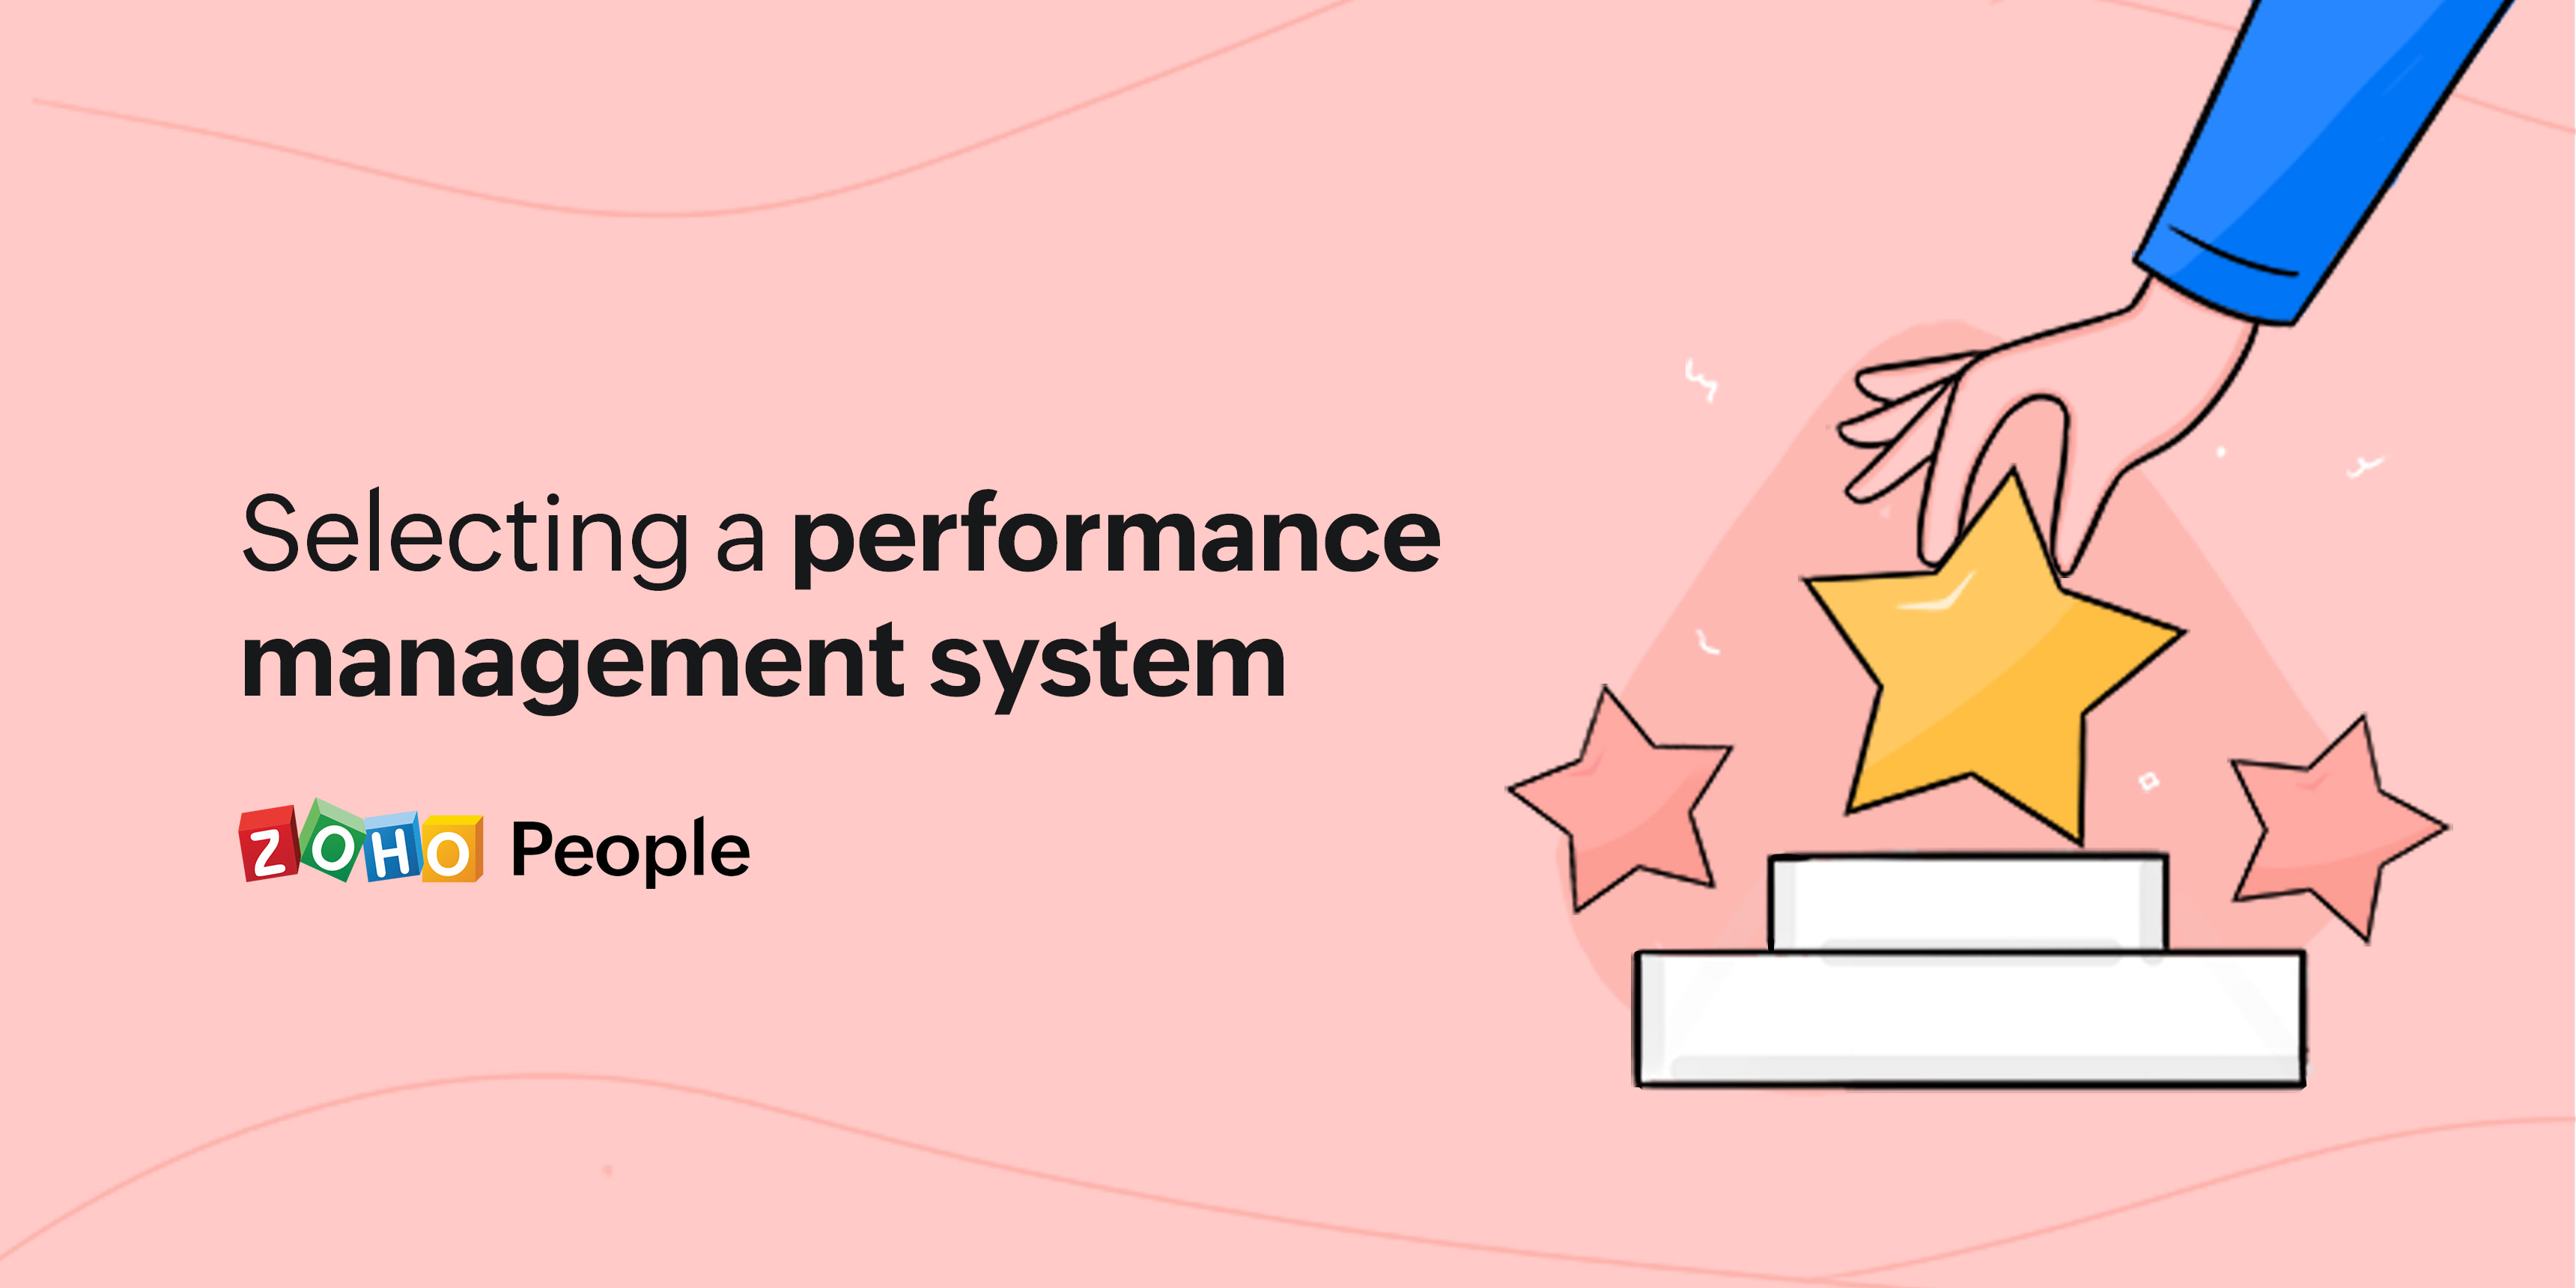 Tips for selecting a performance management system.